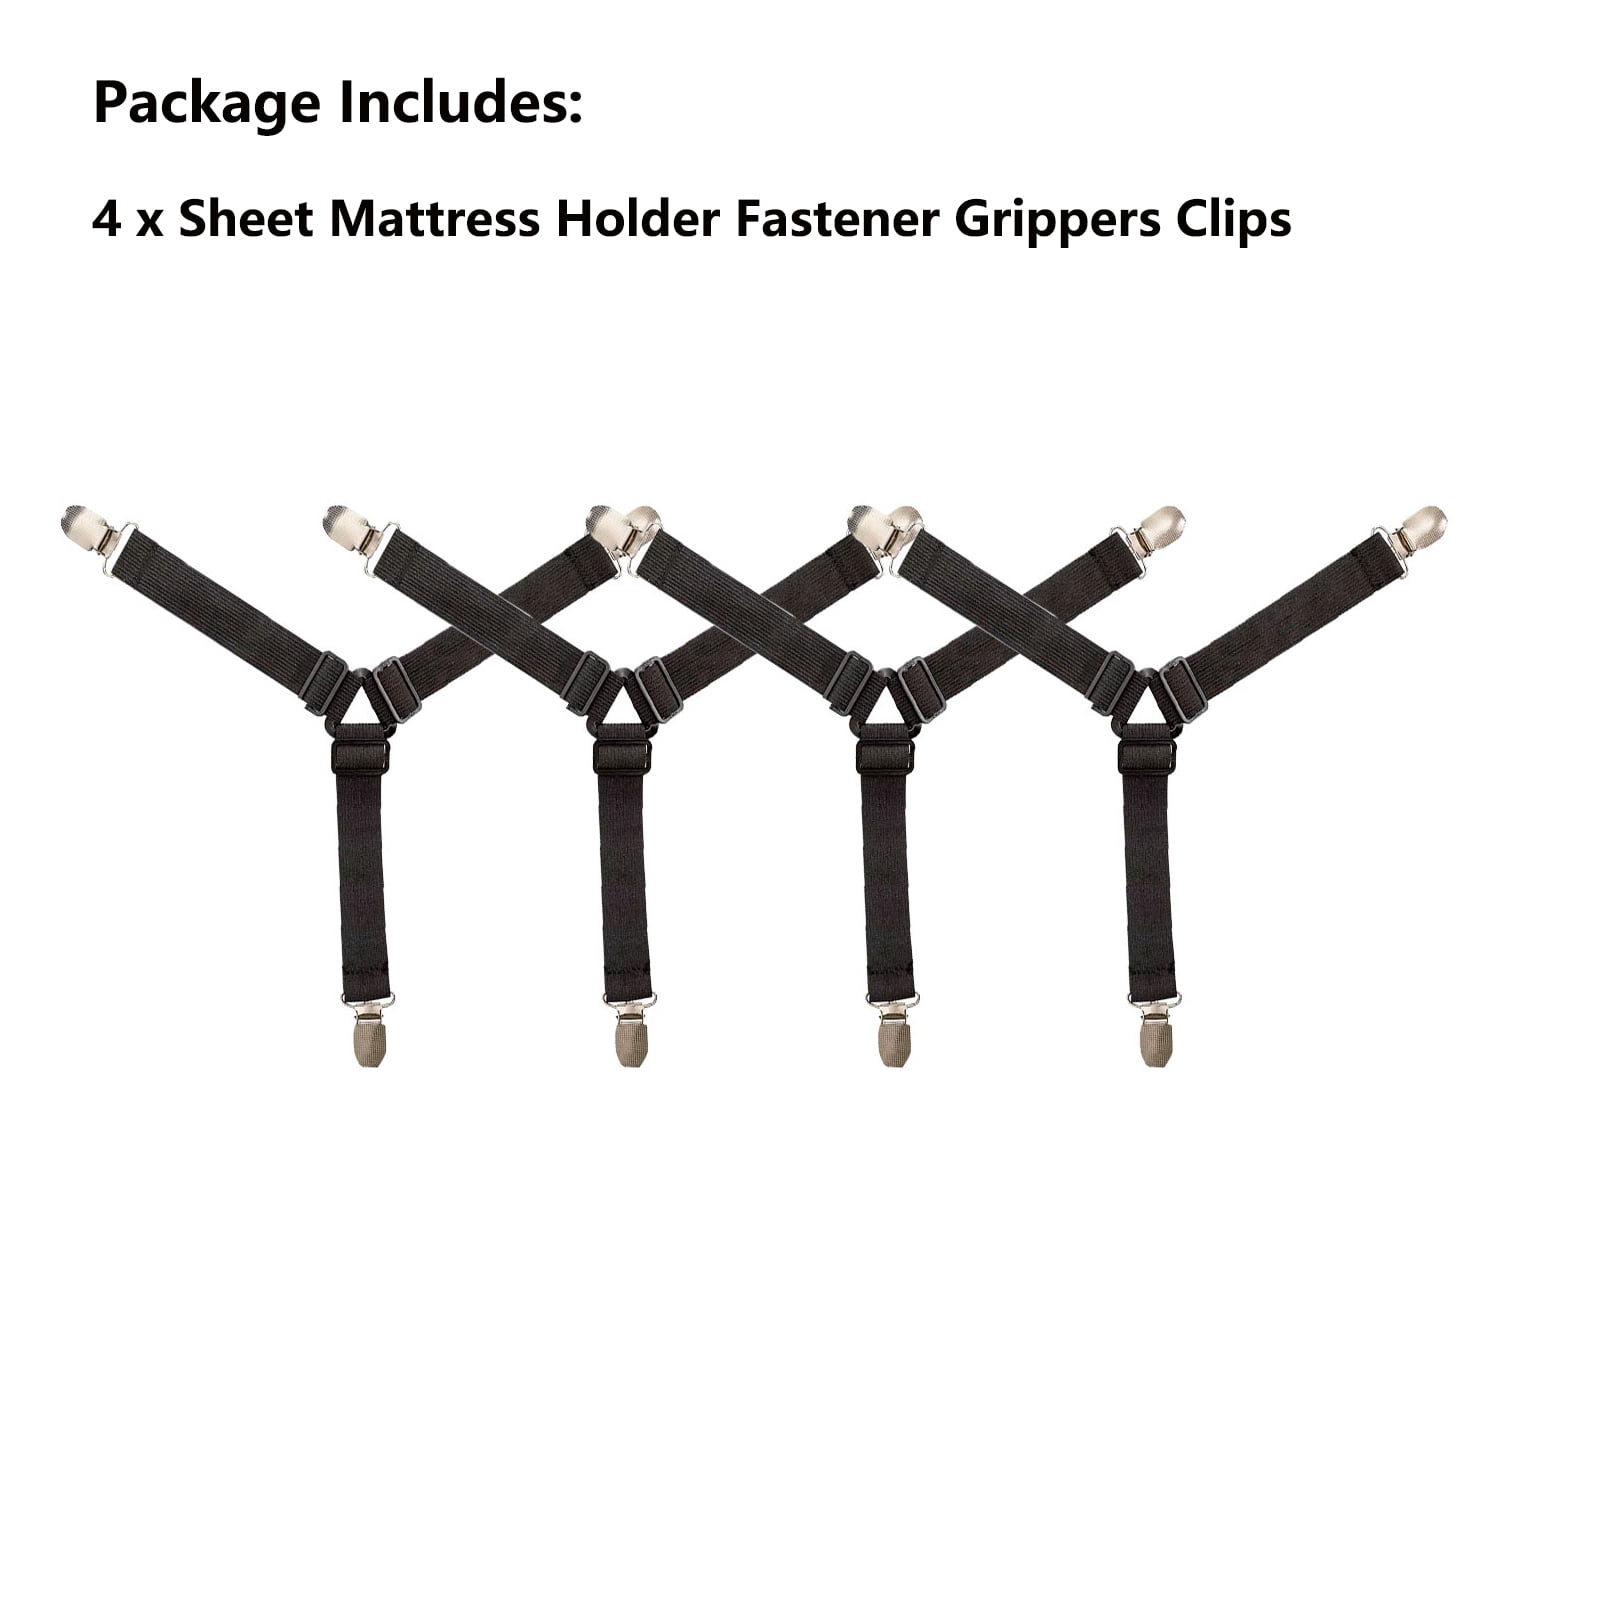 4x Fitted Bed Mattress Sheet Clips Grippers Straps Suspender Fasteners Holder 